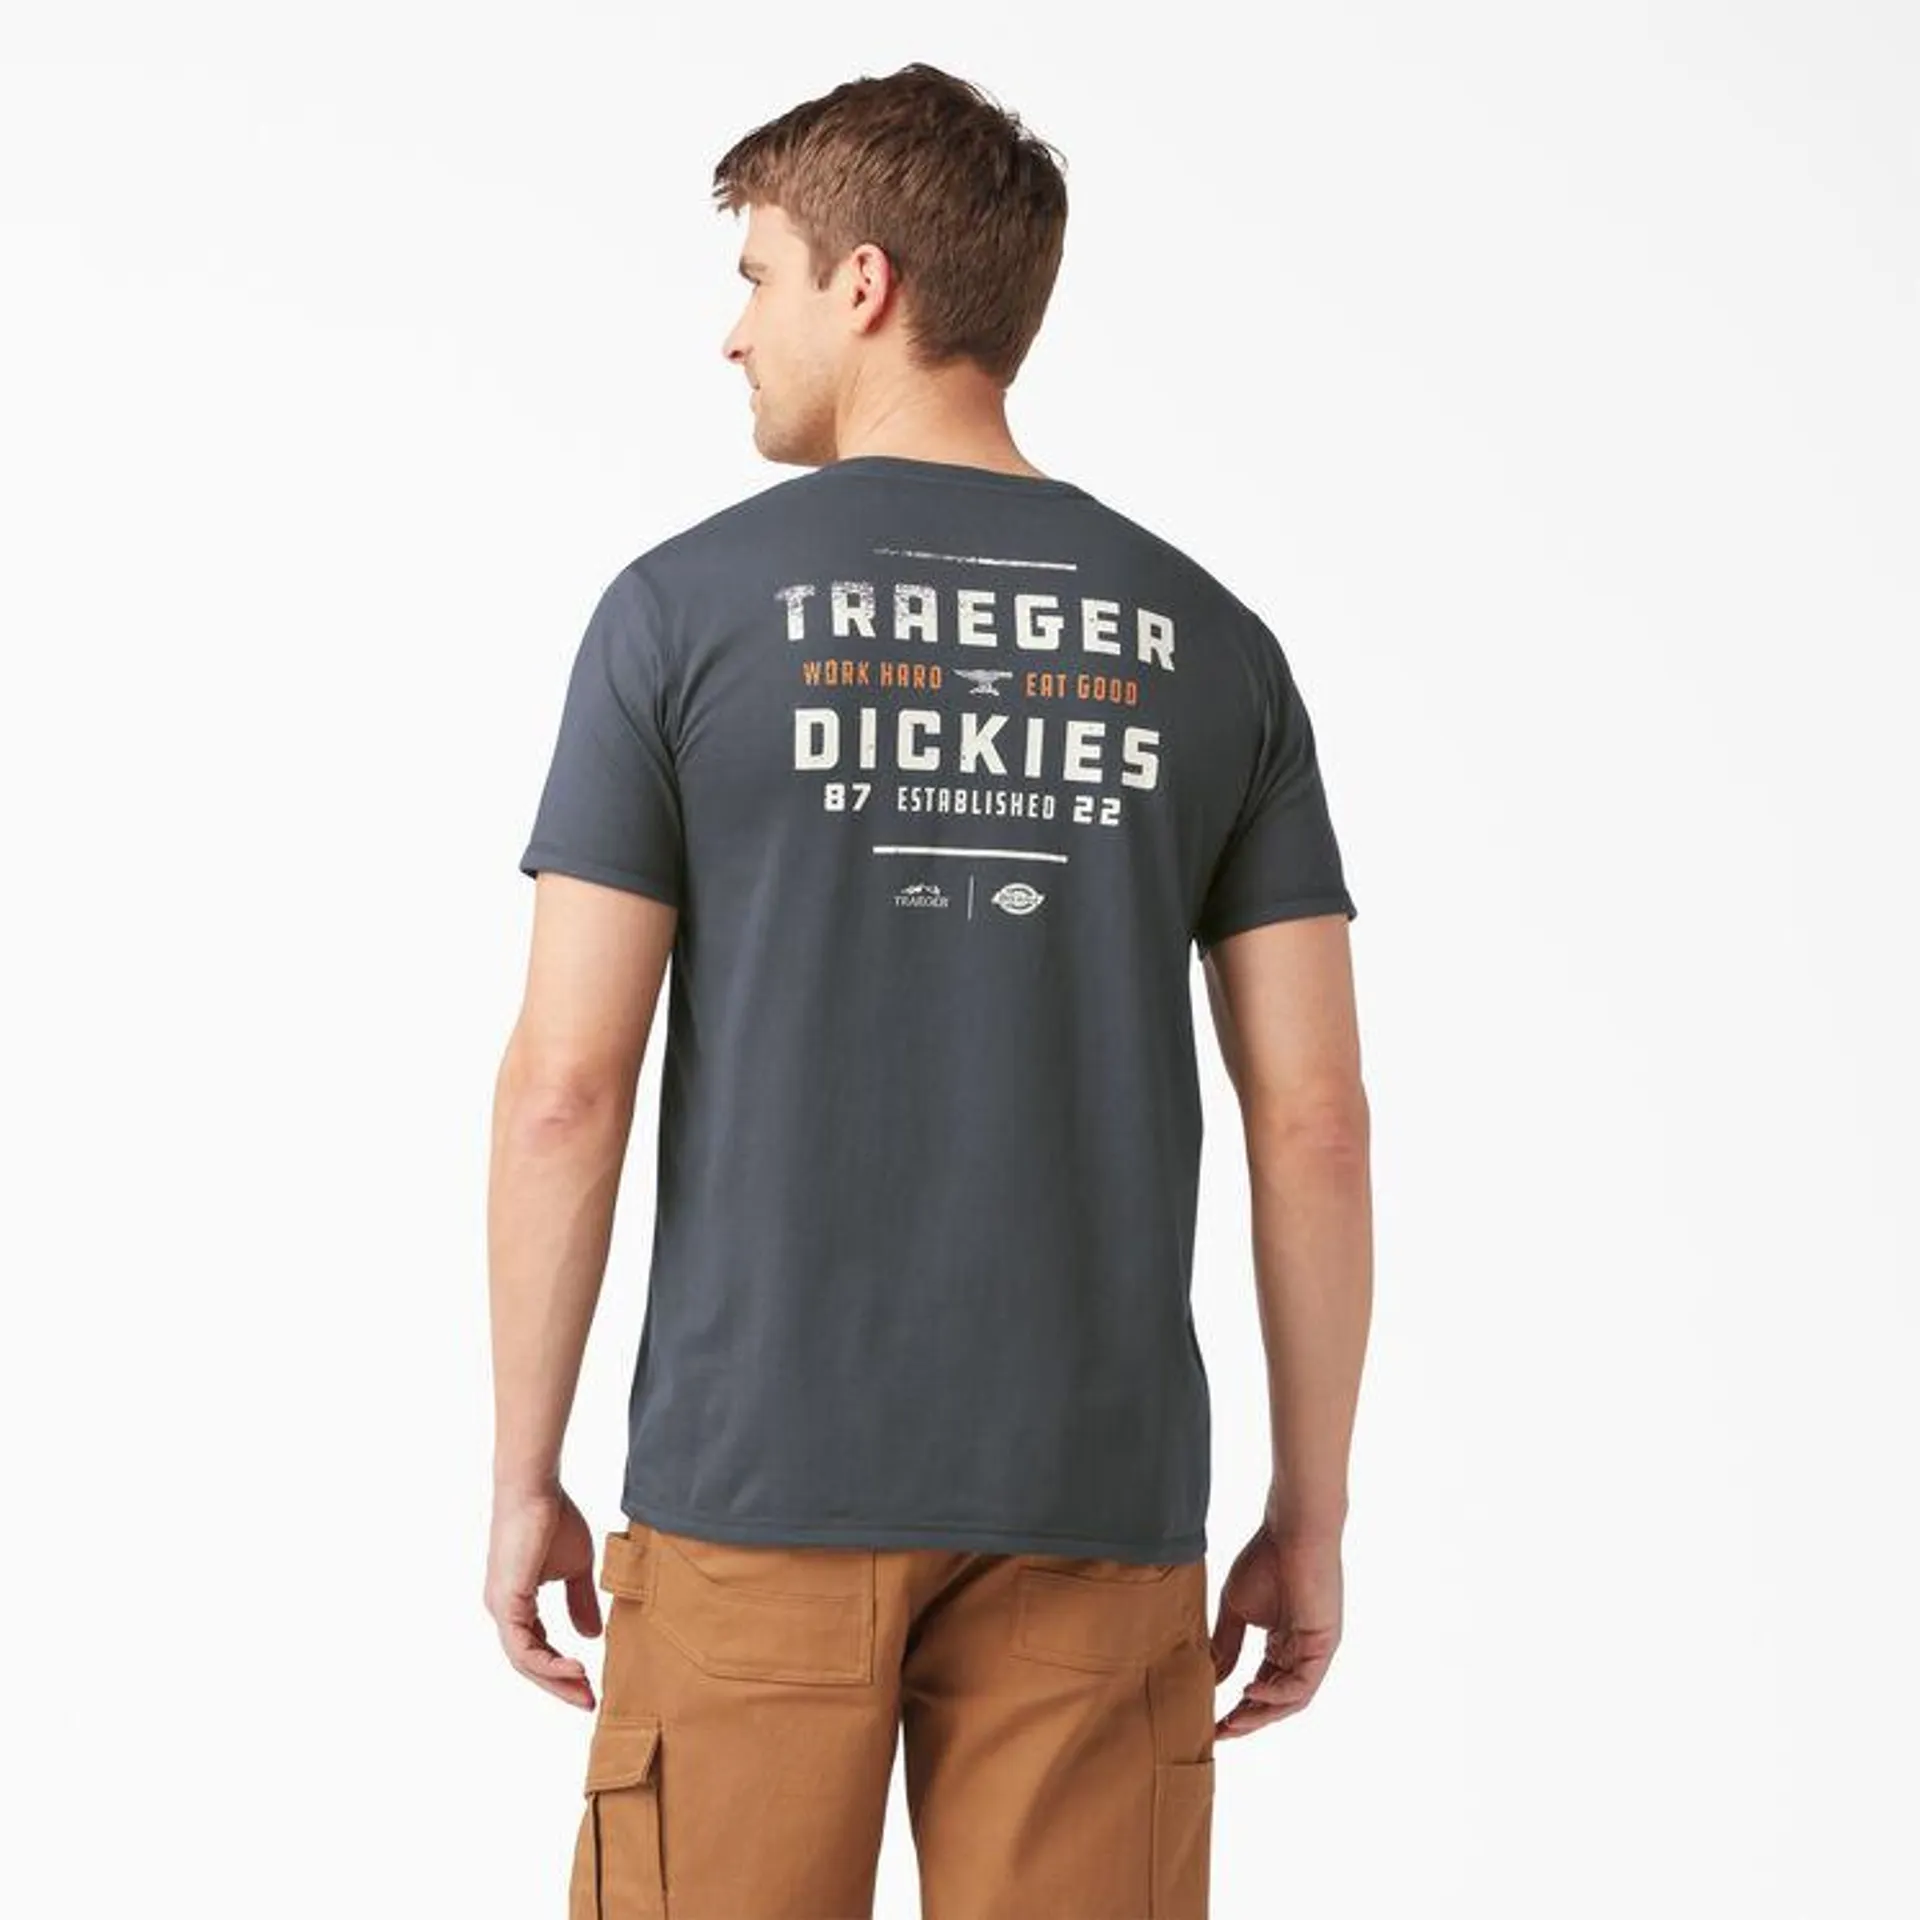 Traeger x Dickies Ultimate Grilling T-Shirt, Charcoal Gray